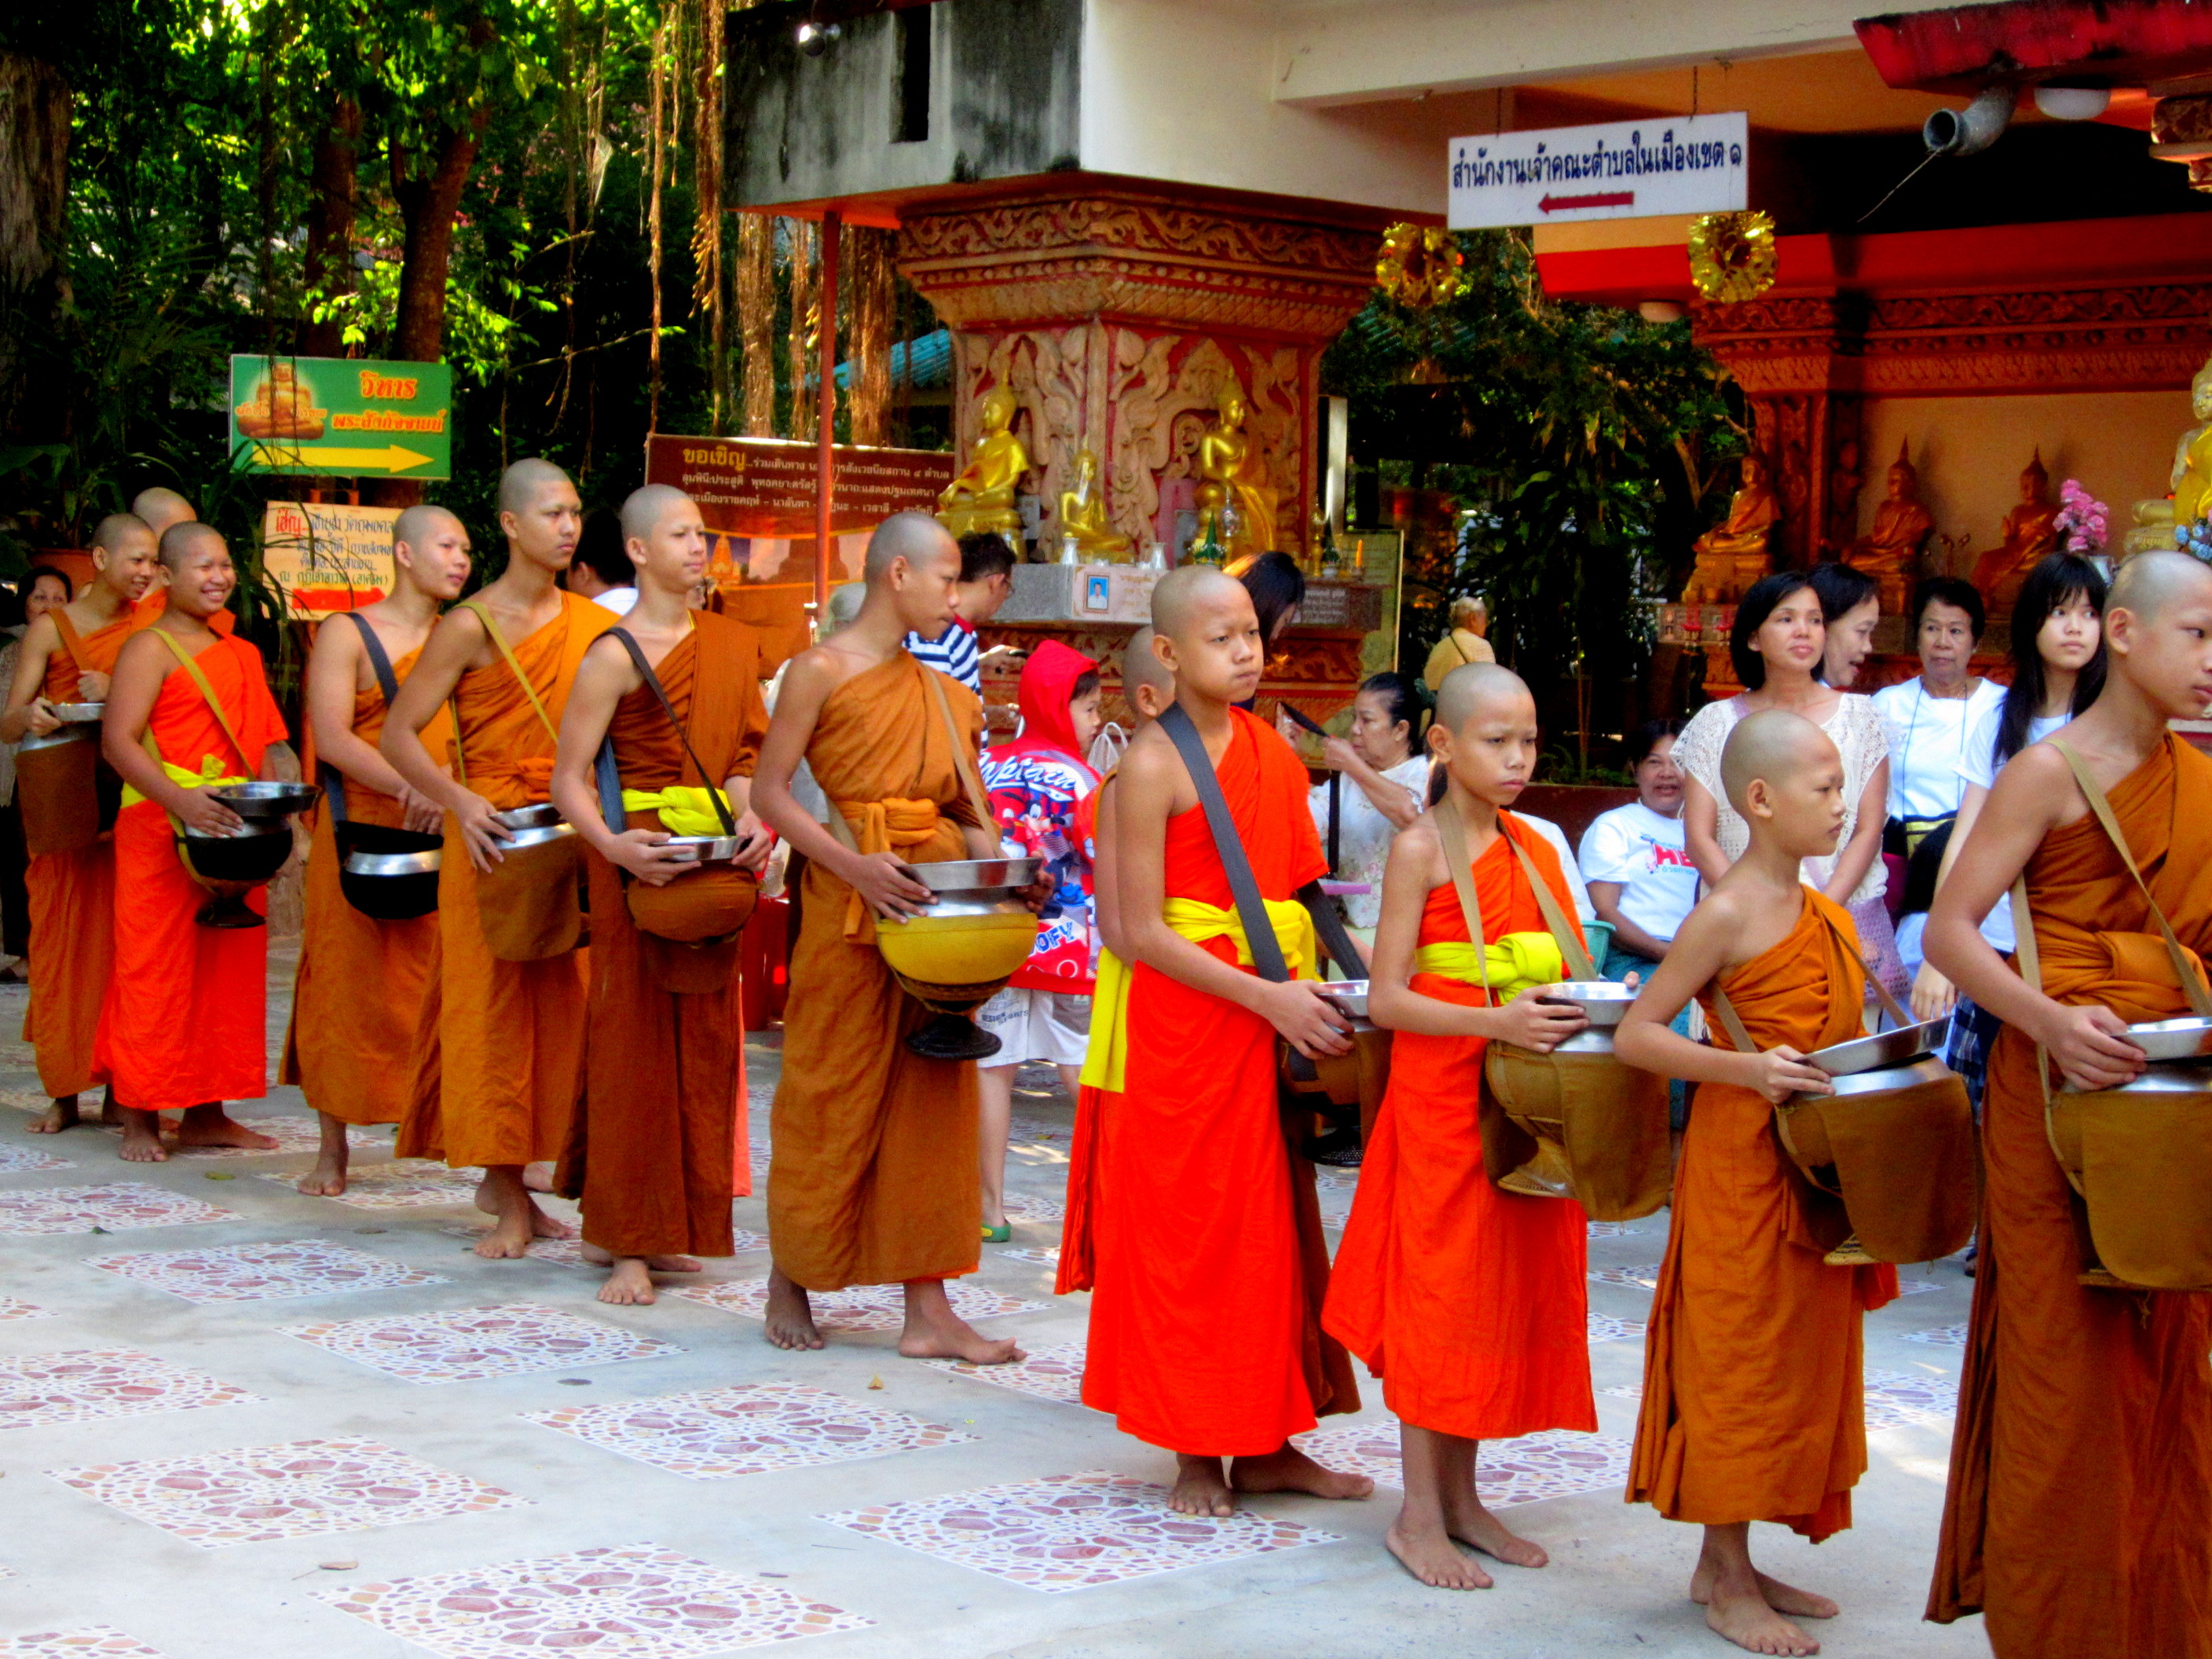 Monks collecting offerings at the Buddhist monastery in Khon Kaen, Thailand